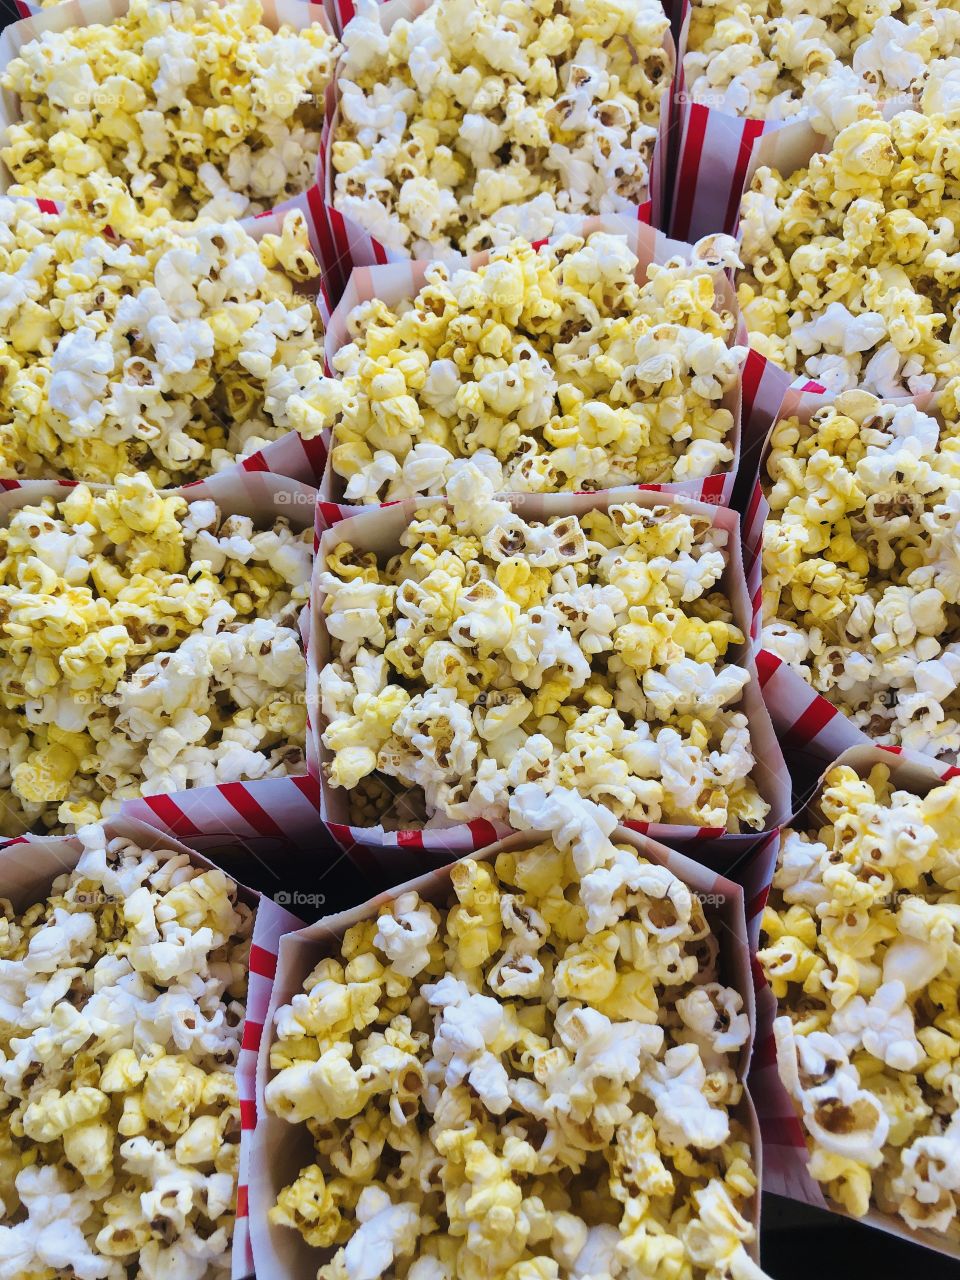 Yummy and Buttery... Who doesn’t love freshly made, warm, crunchy popcorn??